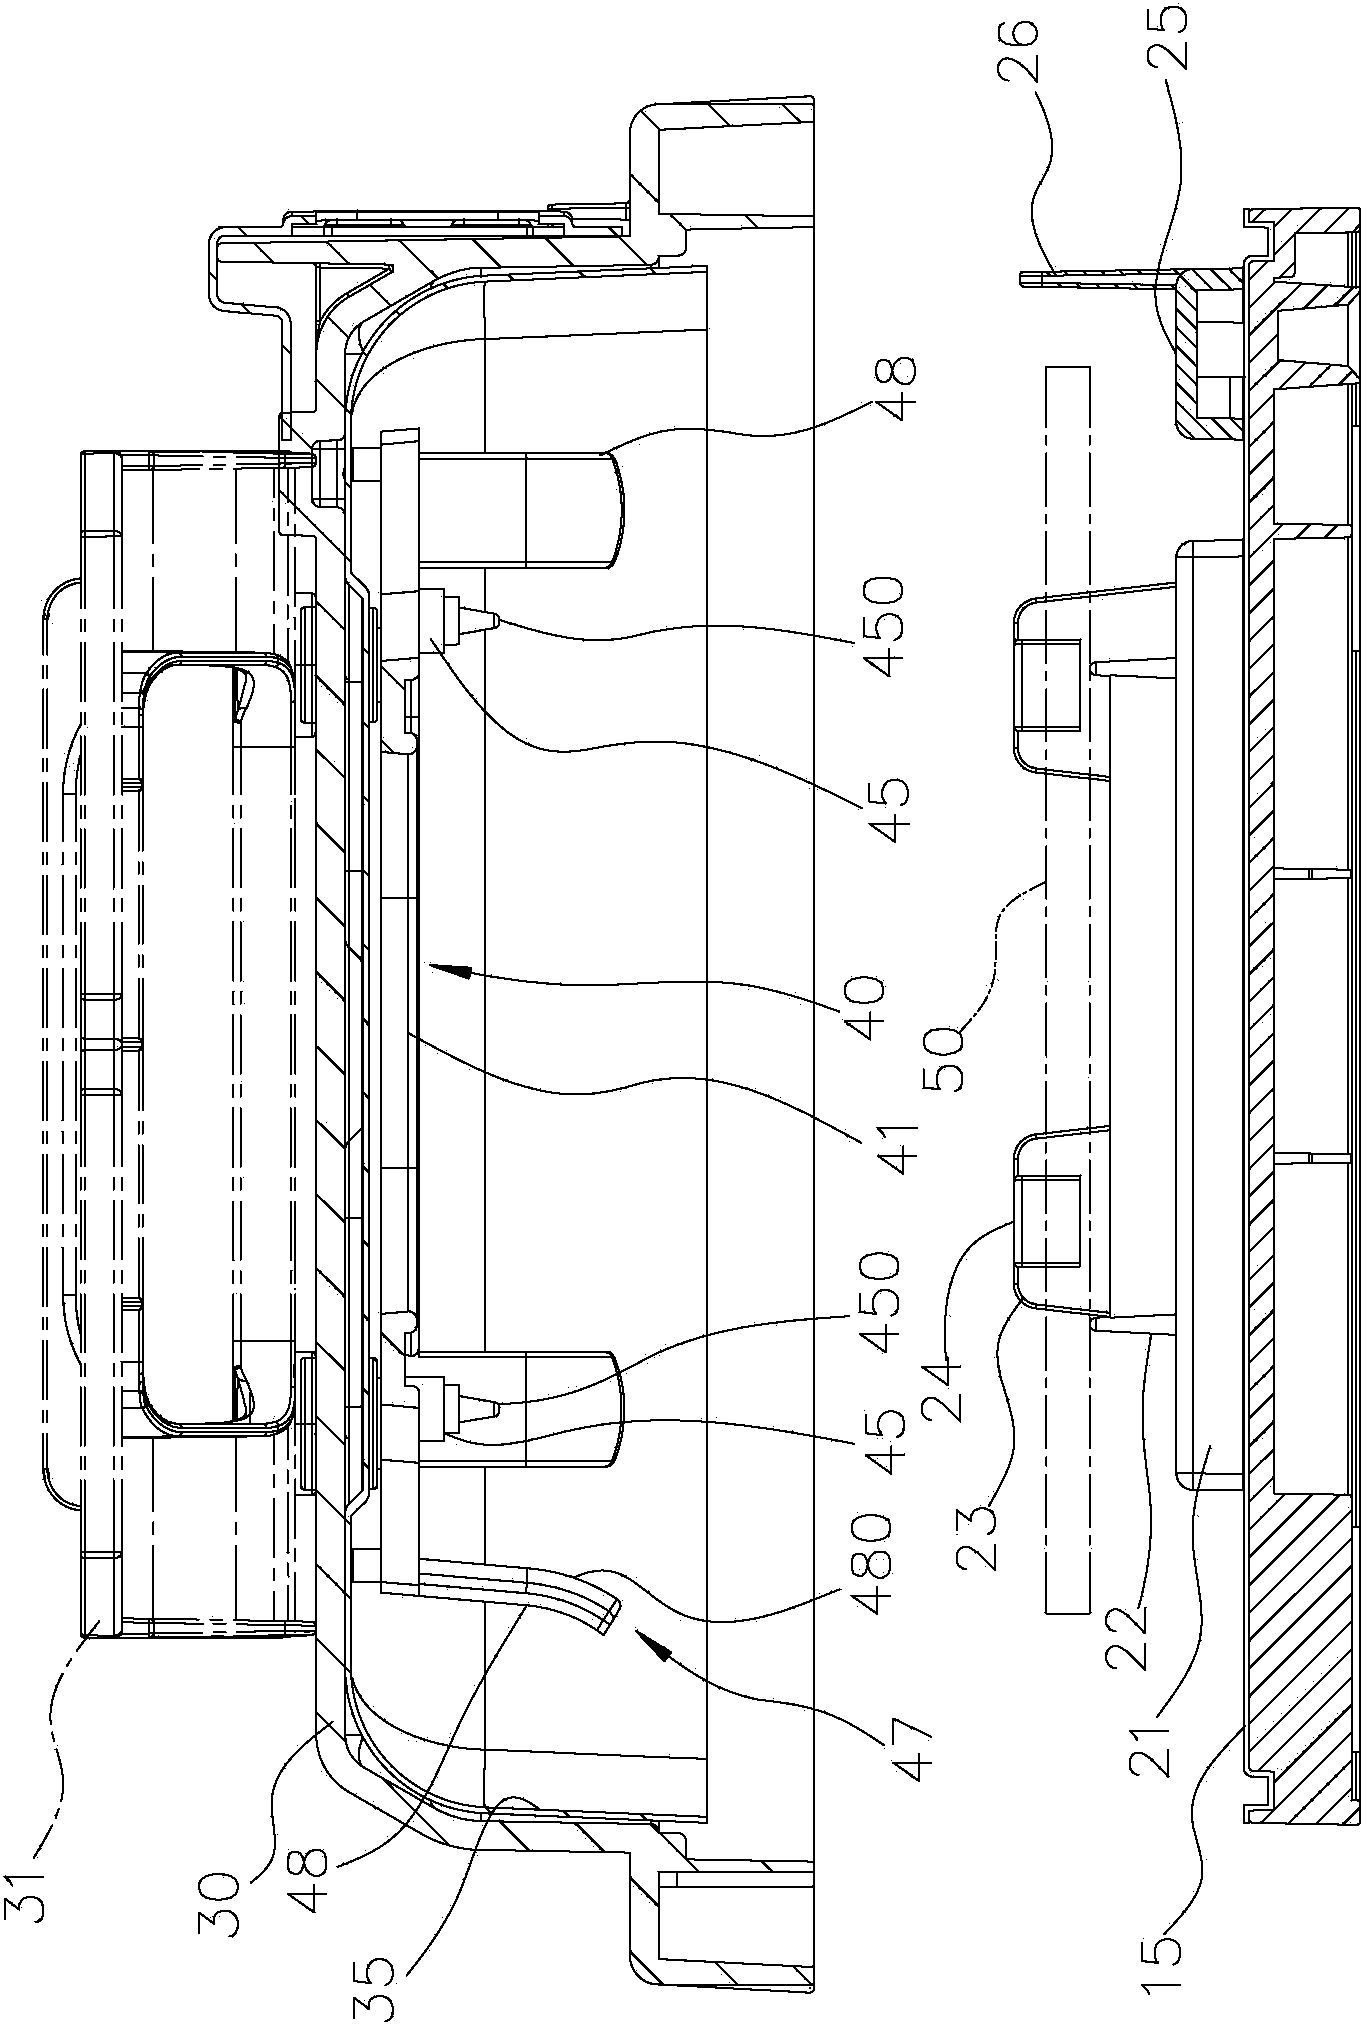 Plastic composition used for wafer/mask carrier and reticle SMIF Pod by using plastic composition